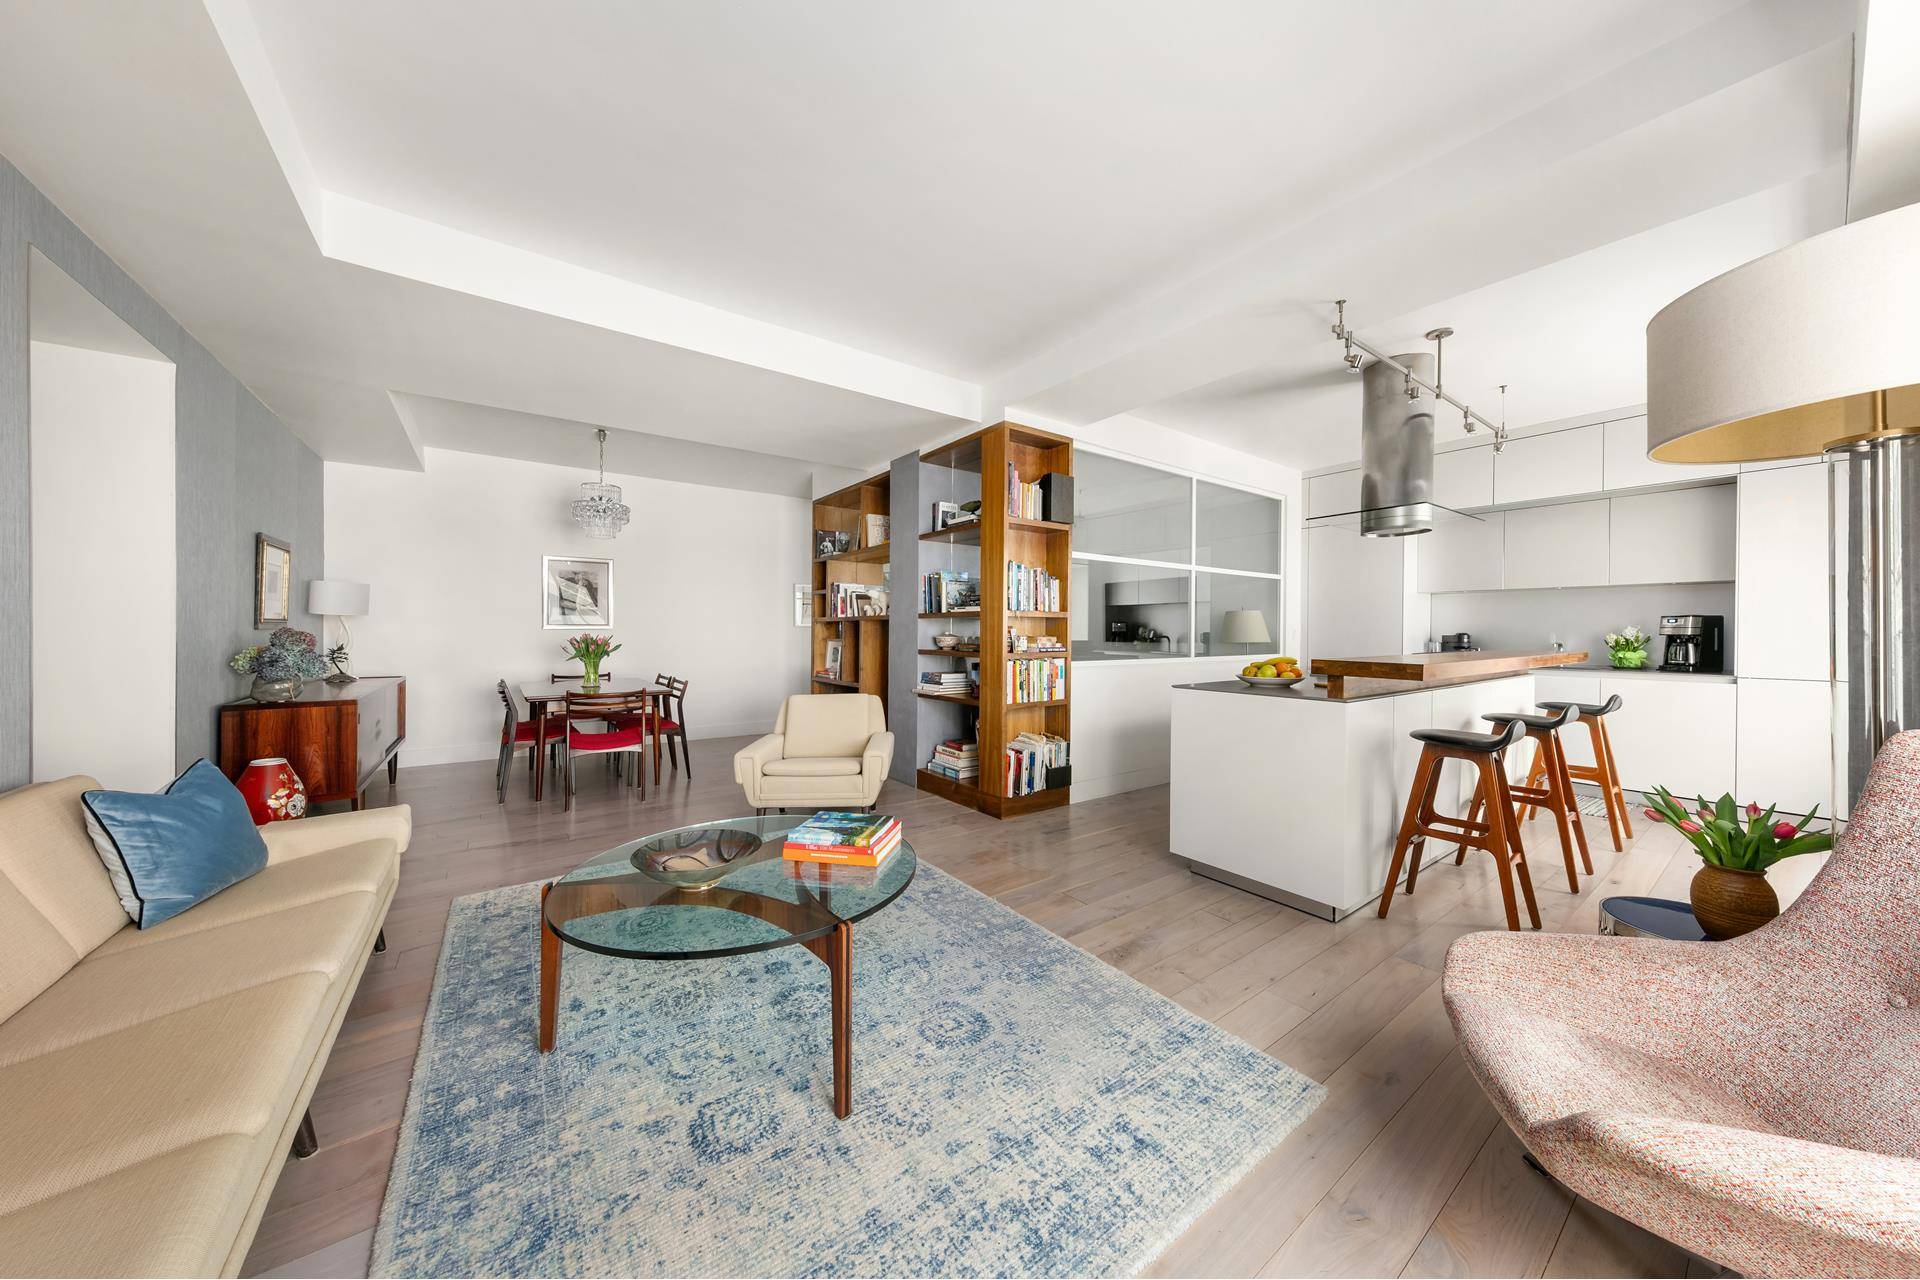 Welcome home to this extraordinary, completely reimagined 3BR 2BA plus den and private terrace condominium residence designed and executed by acclaimed Brooklyn architect, John Hatheway.